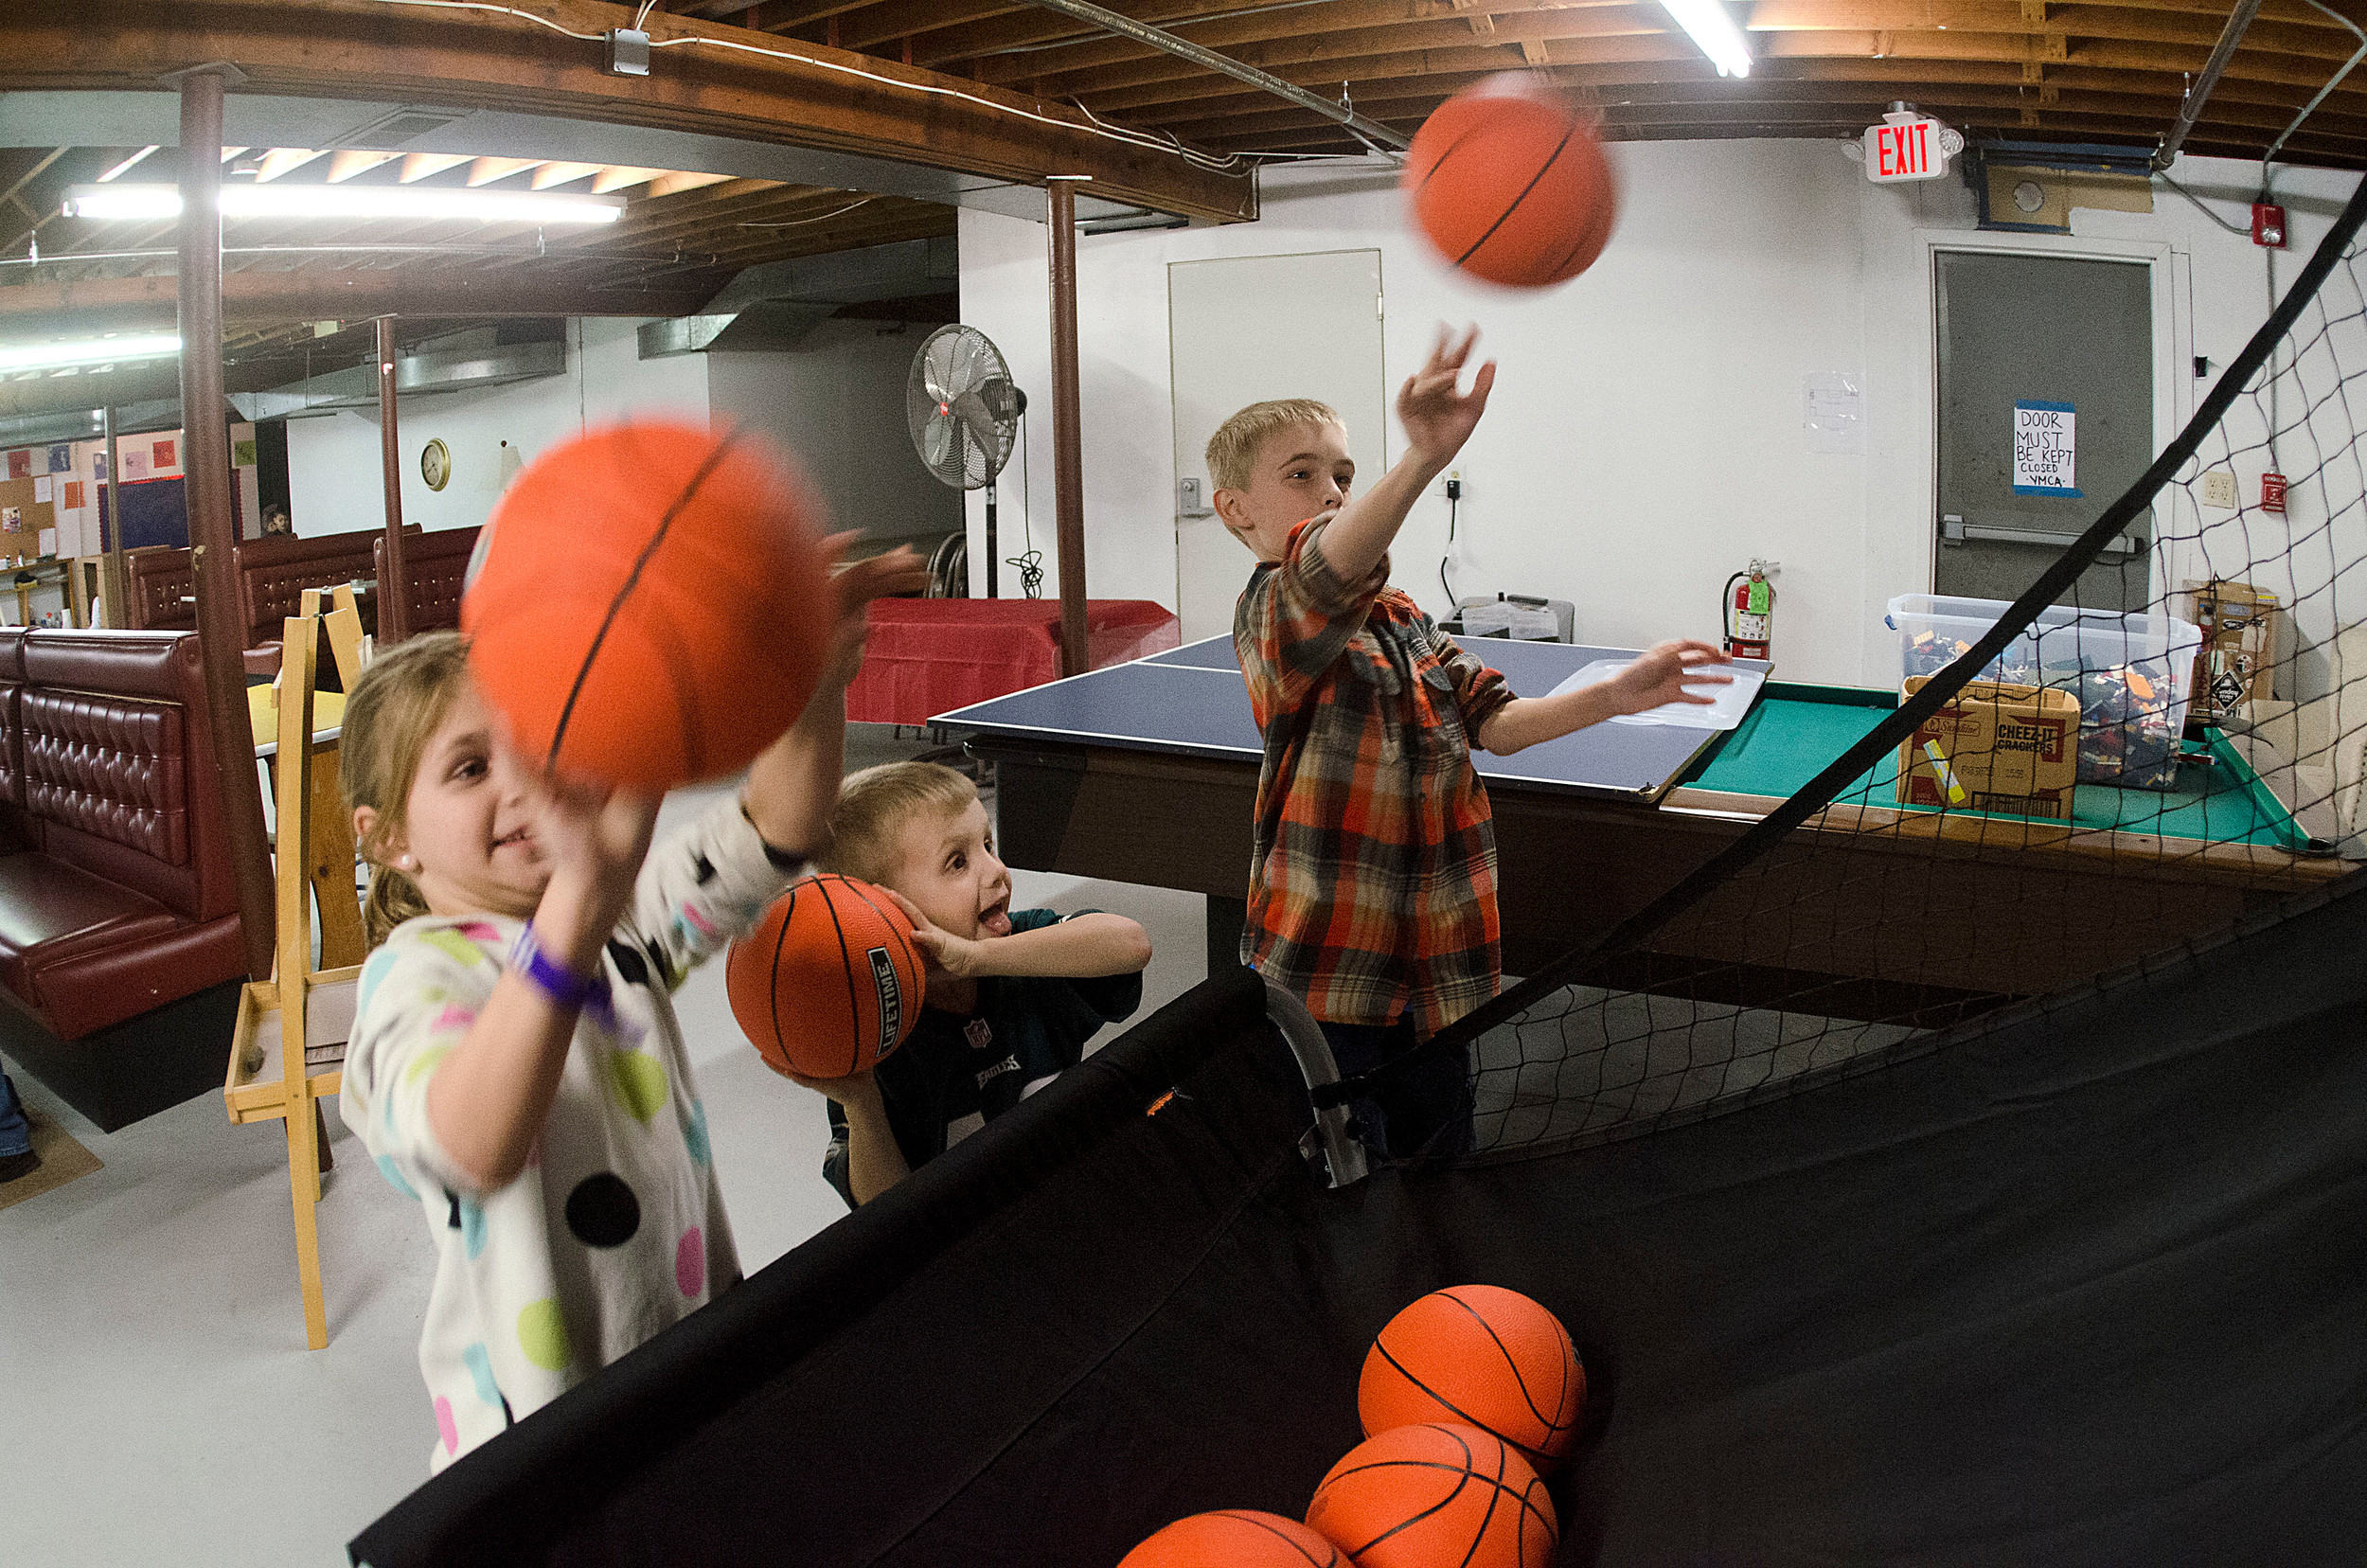 Brooke Marston, 7, Chase Marston, 5 and Jack Marston, 9 (from left), play a basketball shooting game in the basement of the Common Fence Point Community Hall. They were there for the after-school program facilitated by the Newport County YMCA.